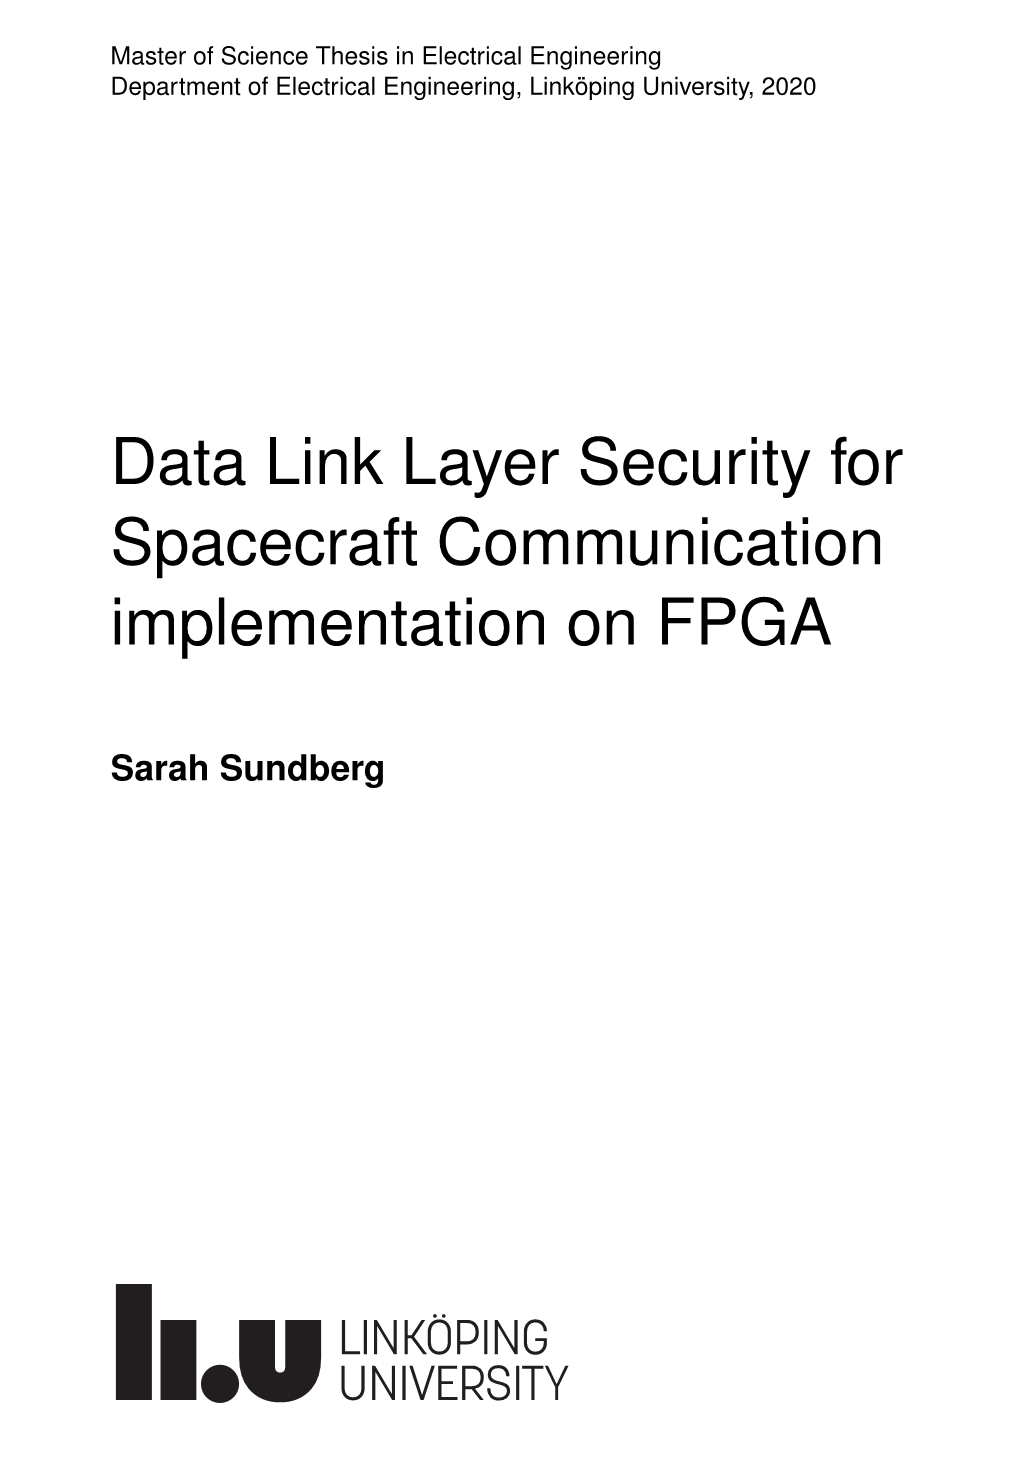 Data Link Layer Security for Spacecraft Communication Implementation on FPGA